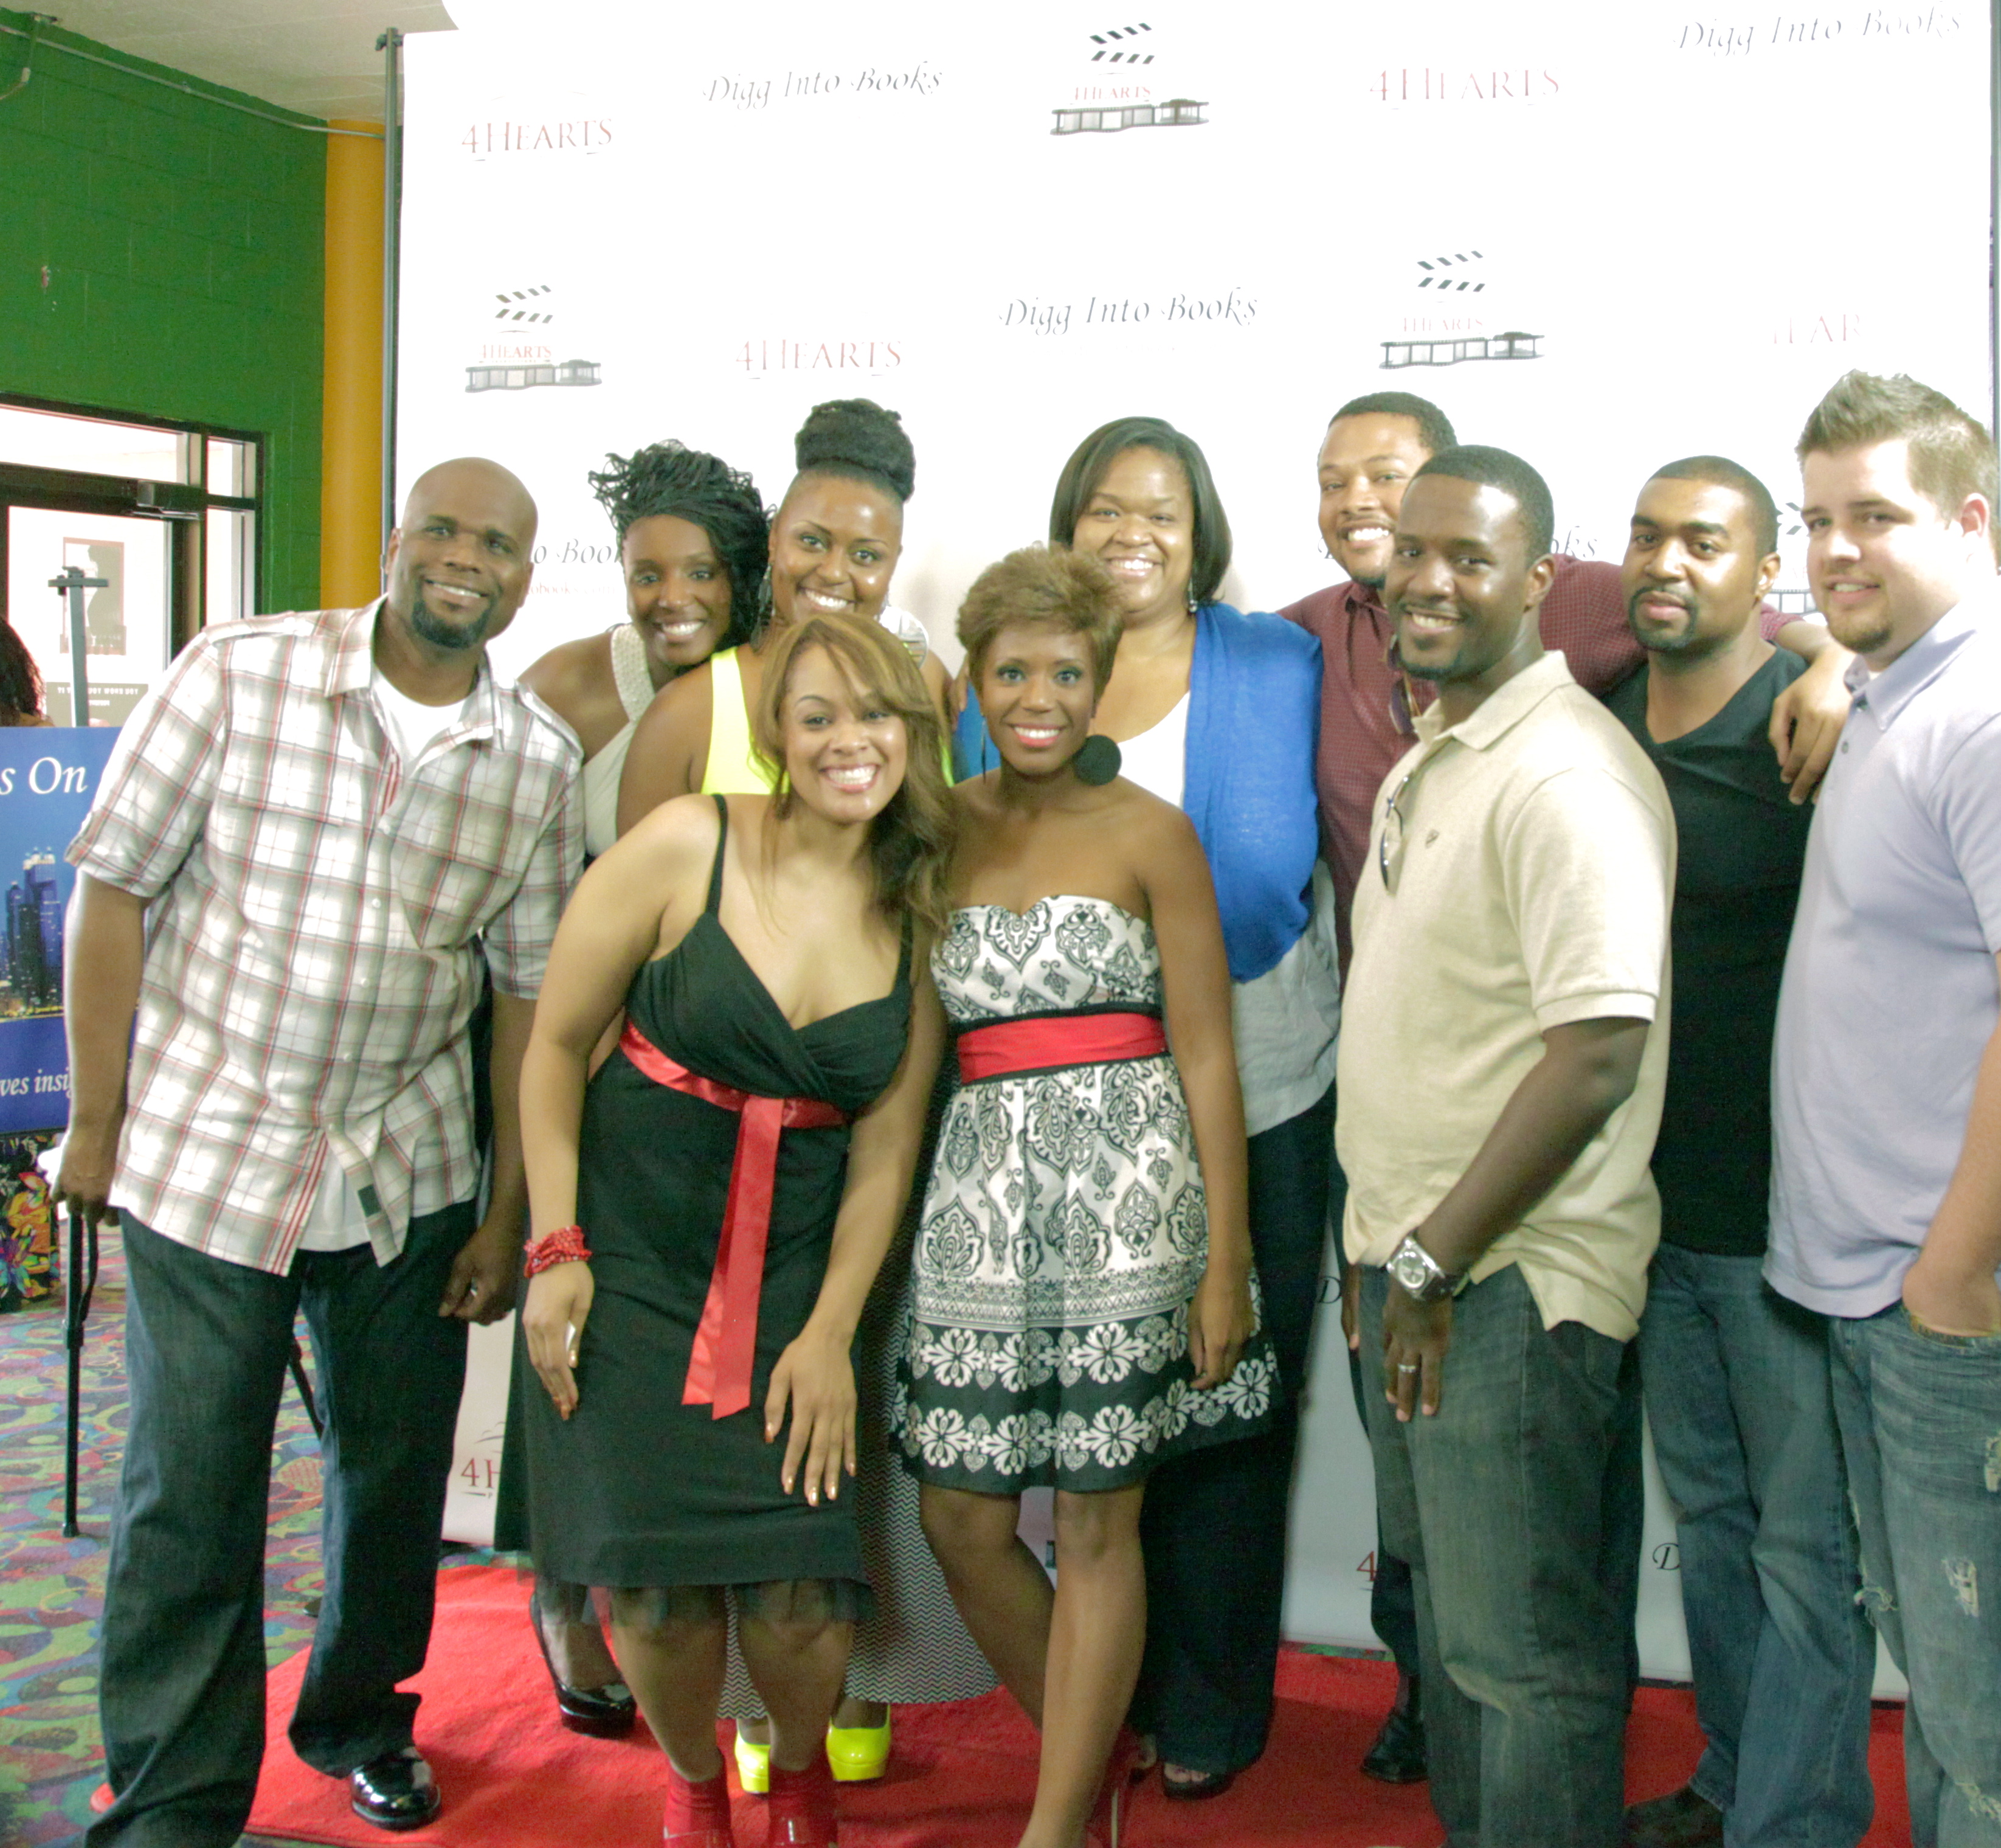 John H Rogers III and Jon C Ross of JR2 Films on the Red Carpet with other Chicago based filmmakers!